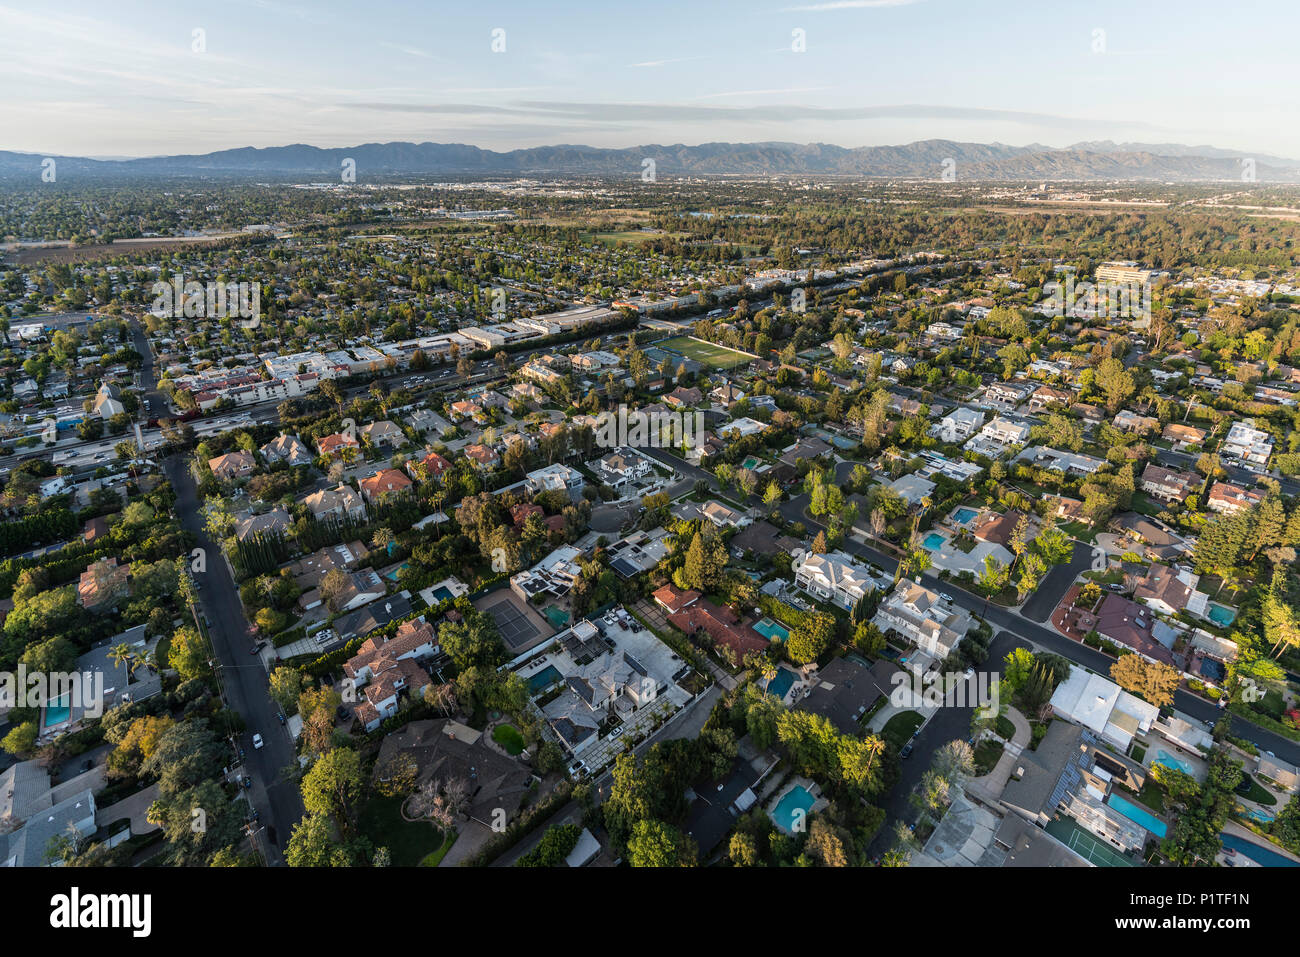 Afternoon aerial view of Encino homes and streets in the San Fernando Valley area of Los Angeles, California. Stock Photo